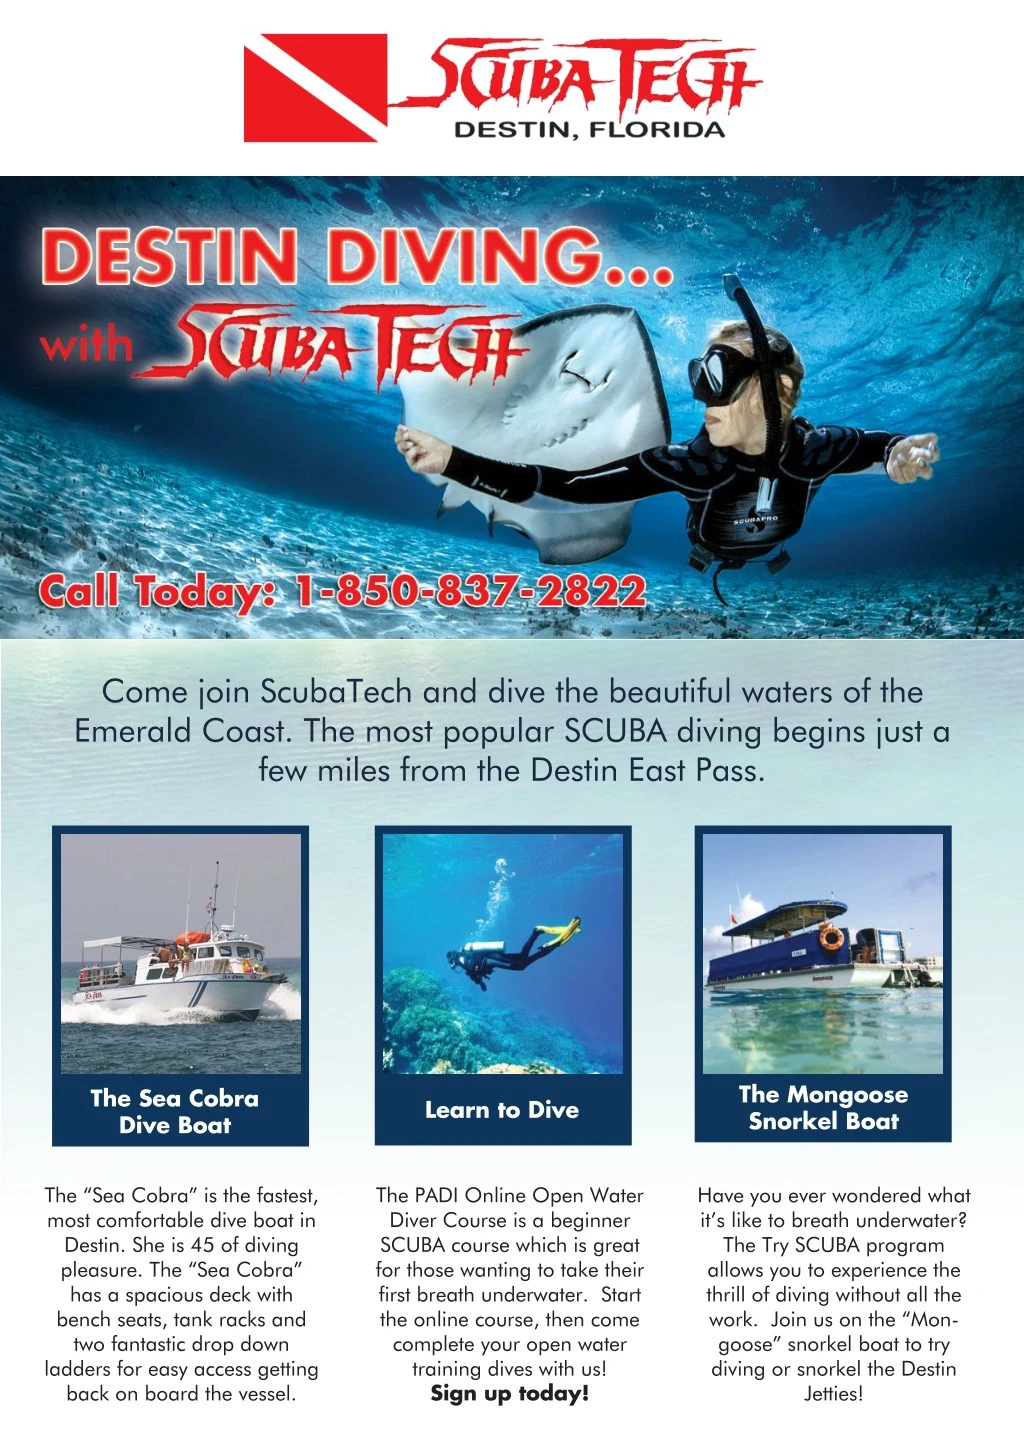 come join scubatech and dive the beautiful waters